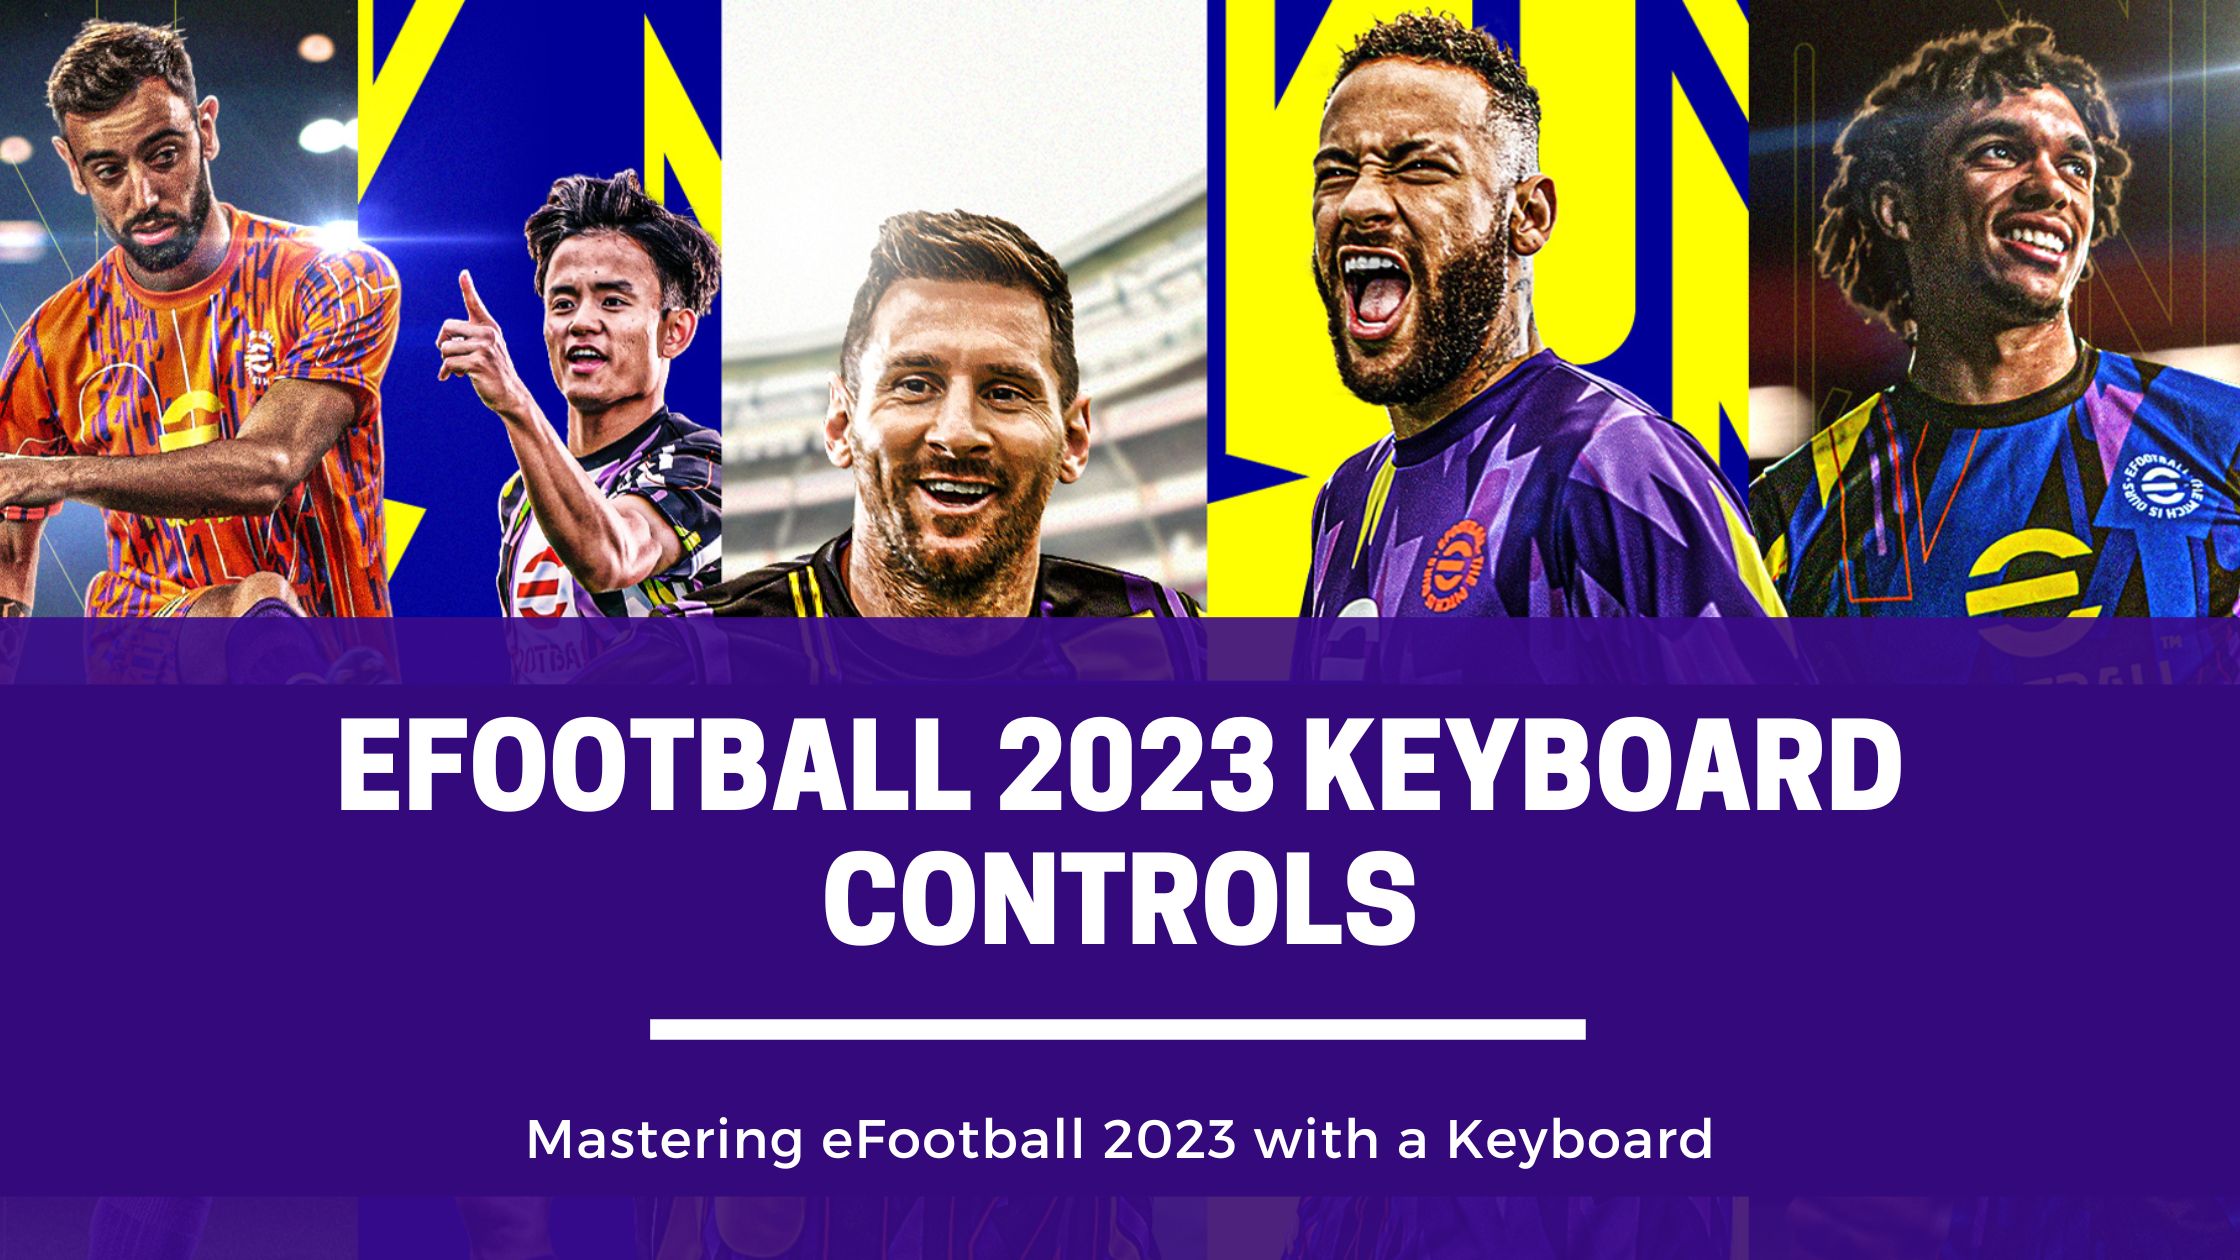 Mastering eFootball 2023 with a Keyboard: A Beginner's Guide